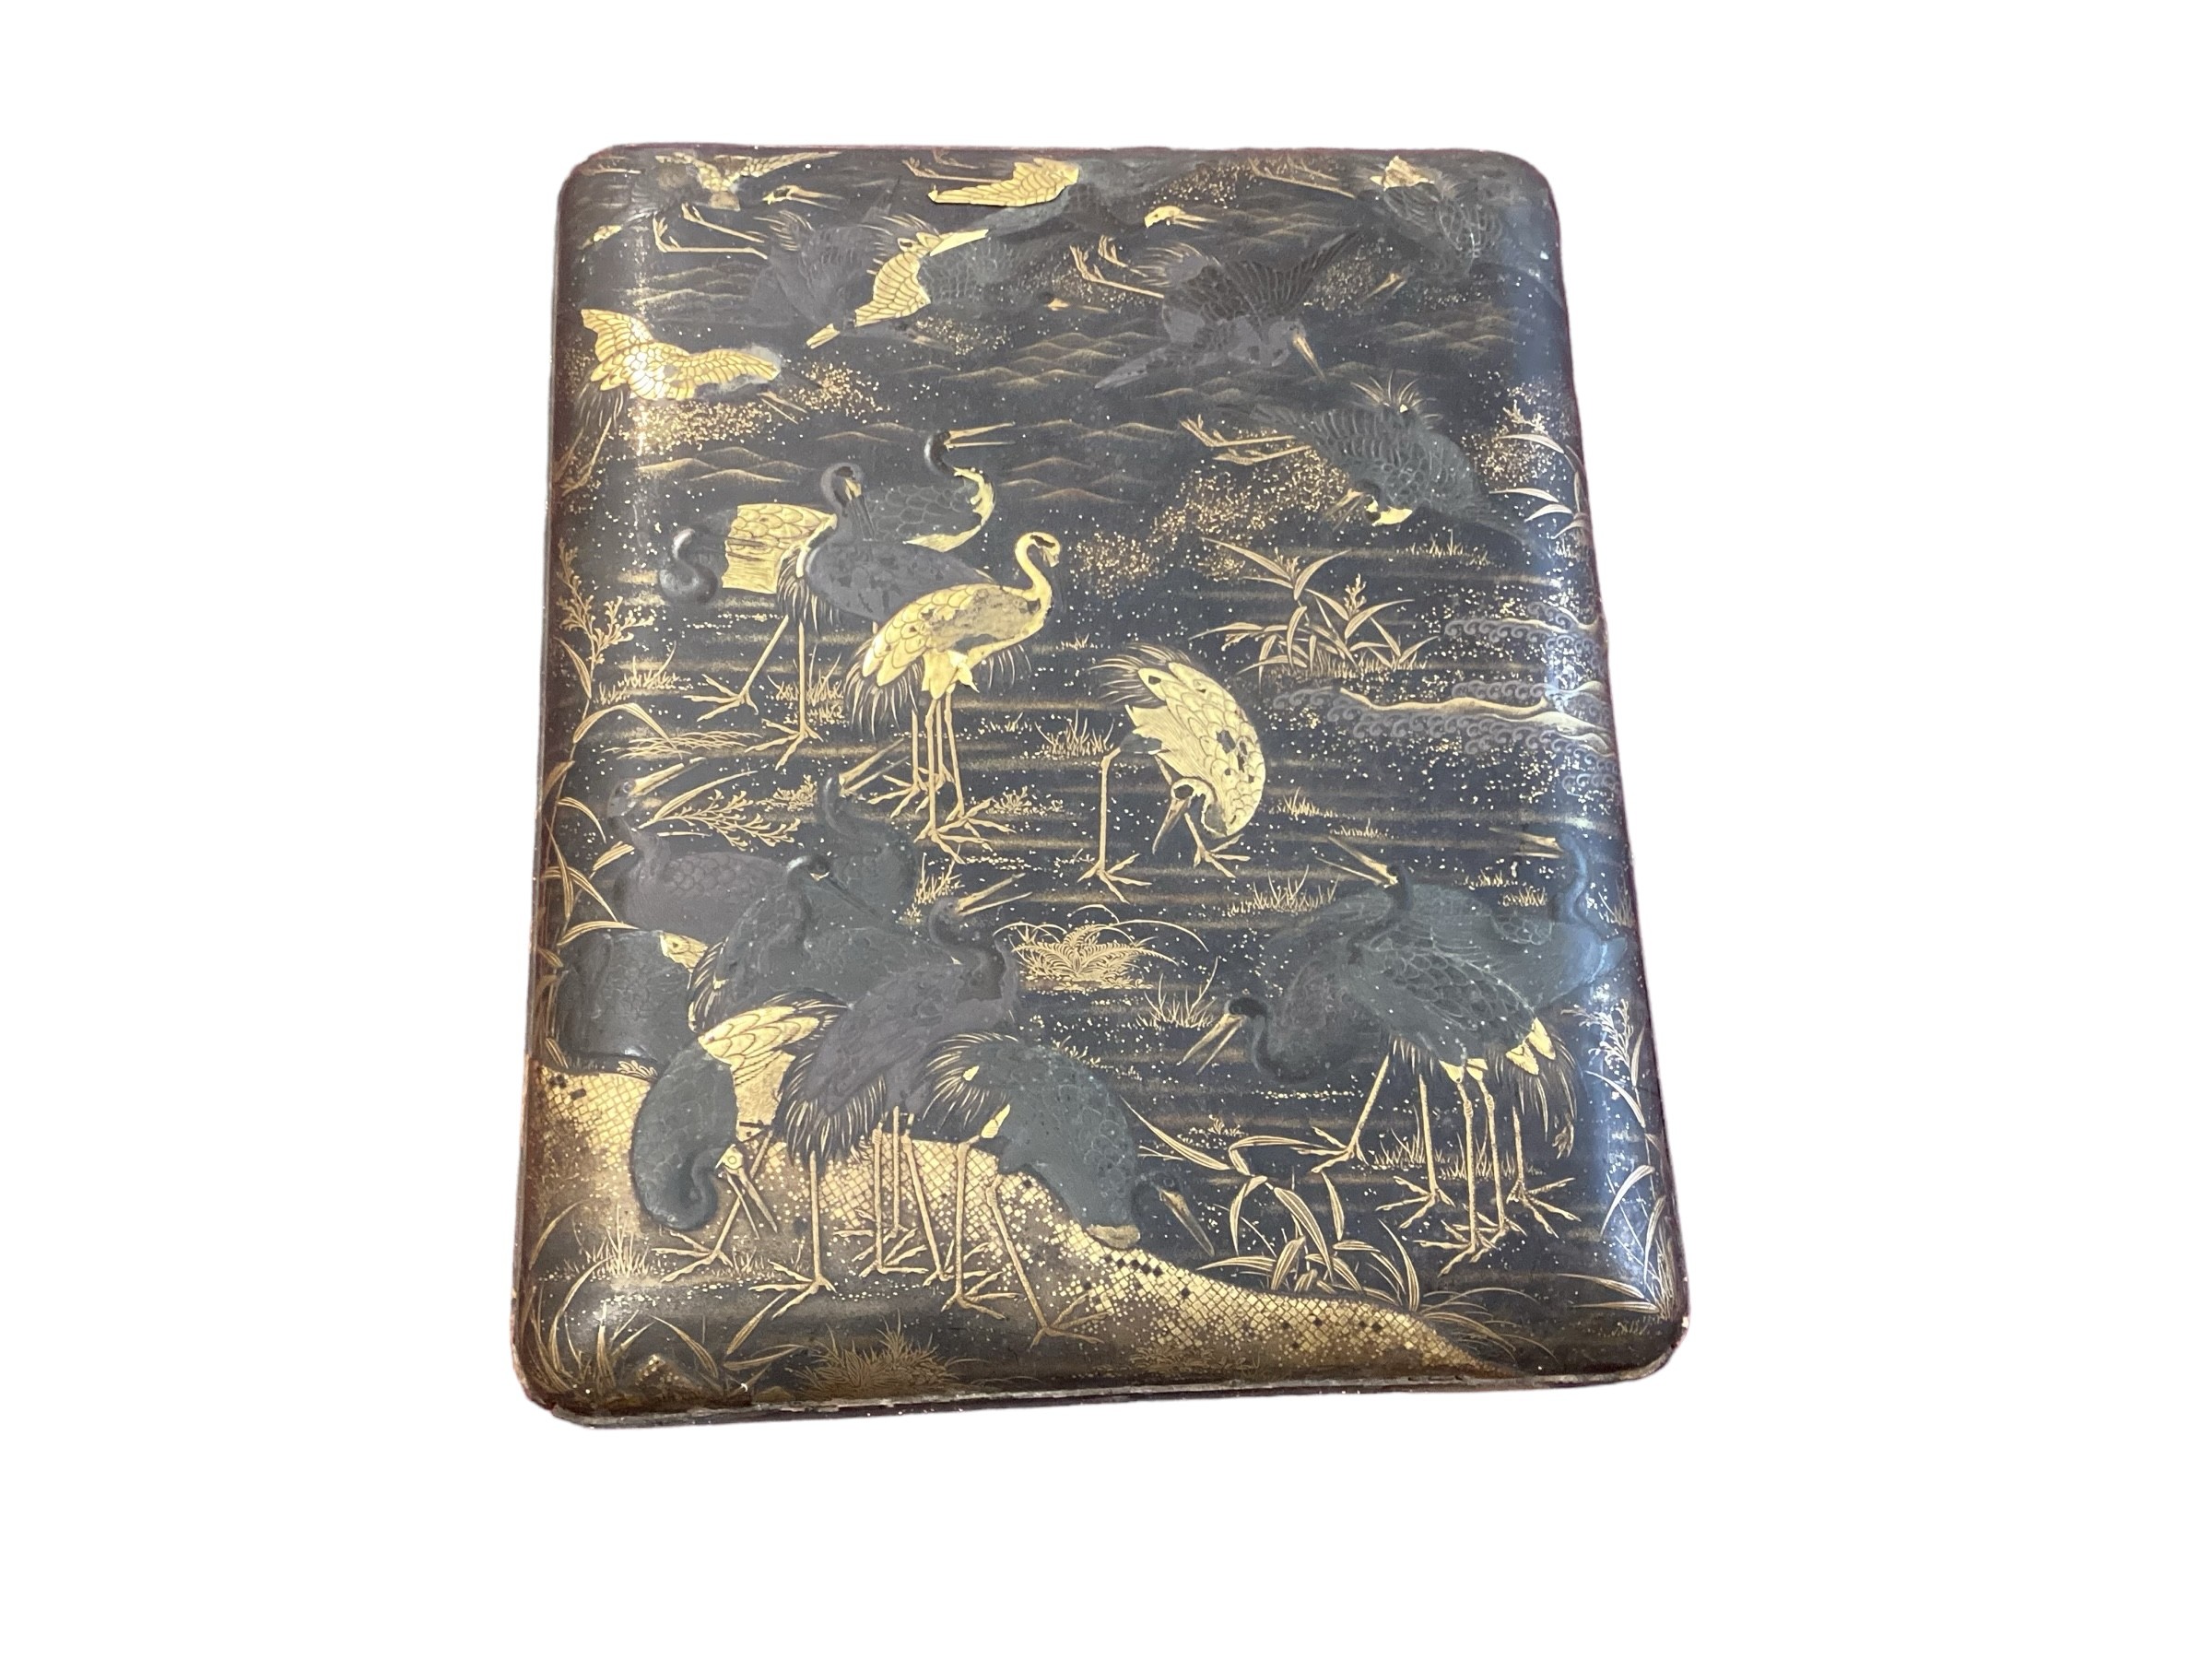 Japanese lacquered writing / painting box depicting cranes. Condition, cracks to lid see photos